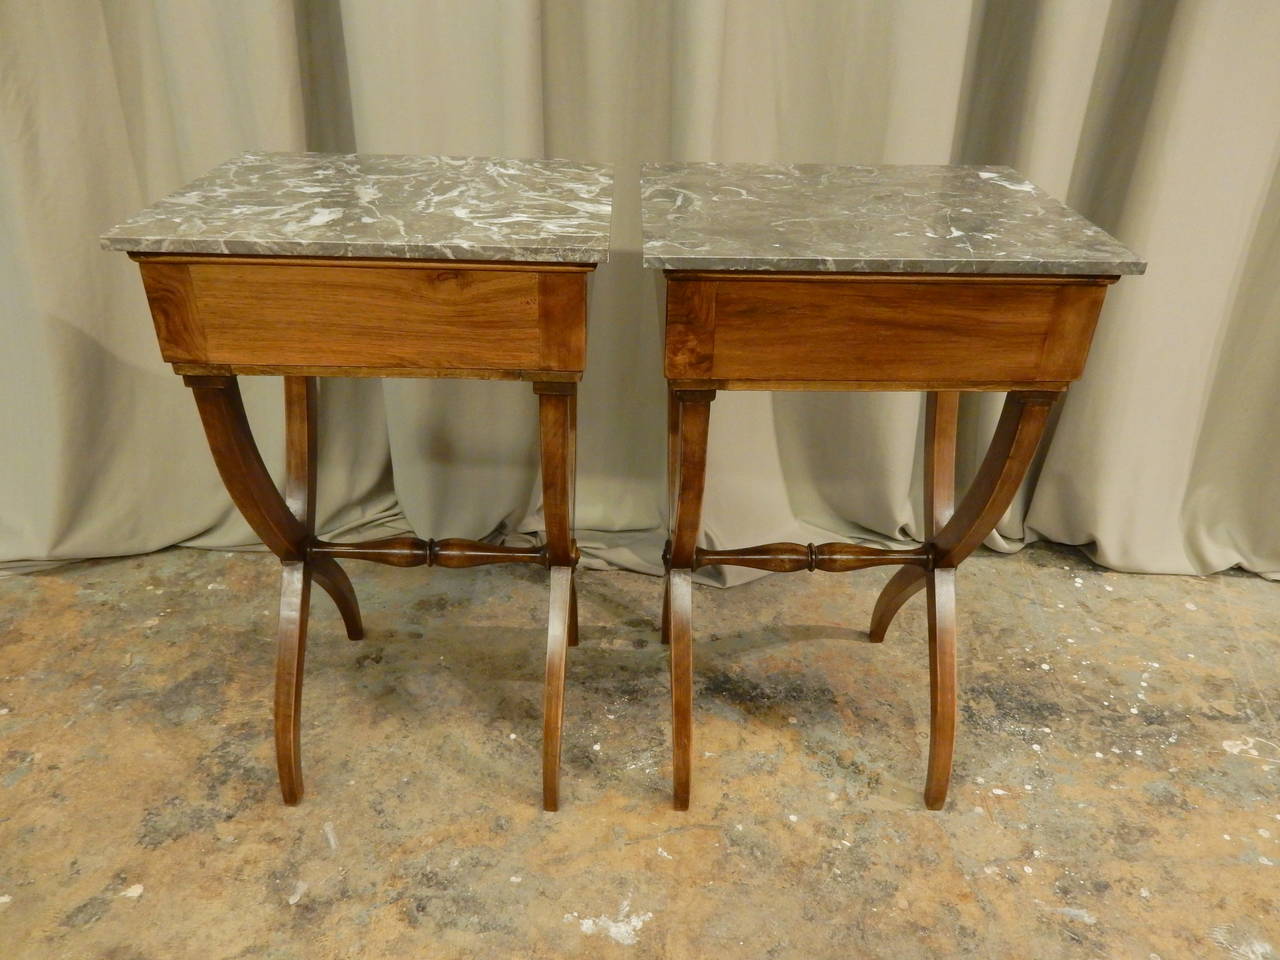 Brass Pair of Mid-19th Century French Walnut Side Tables